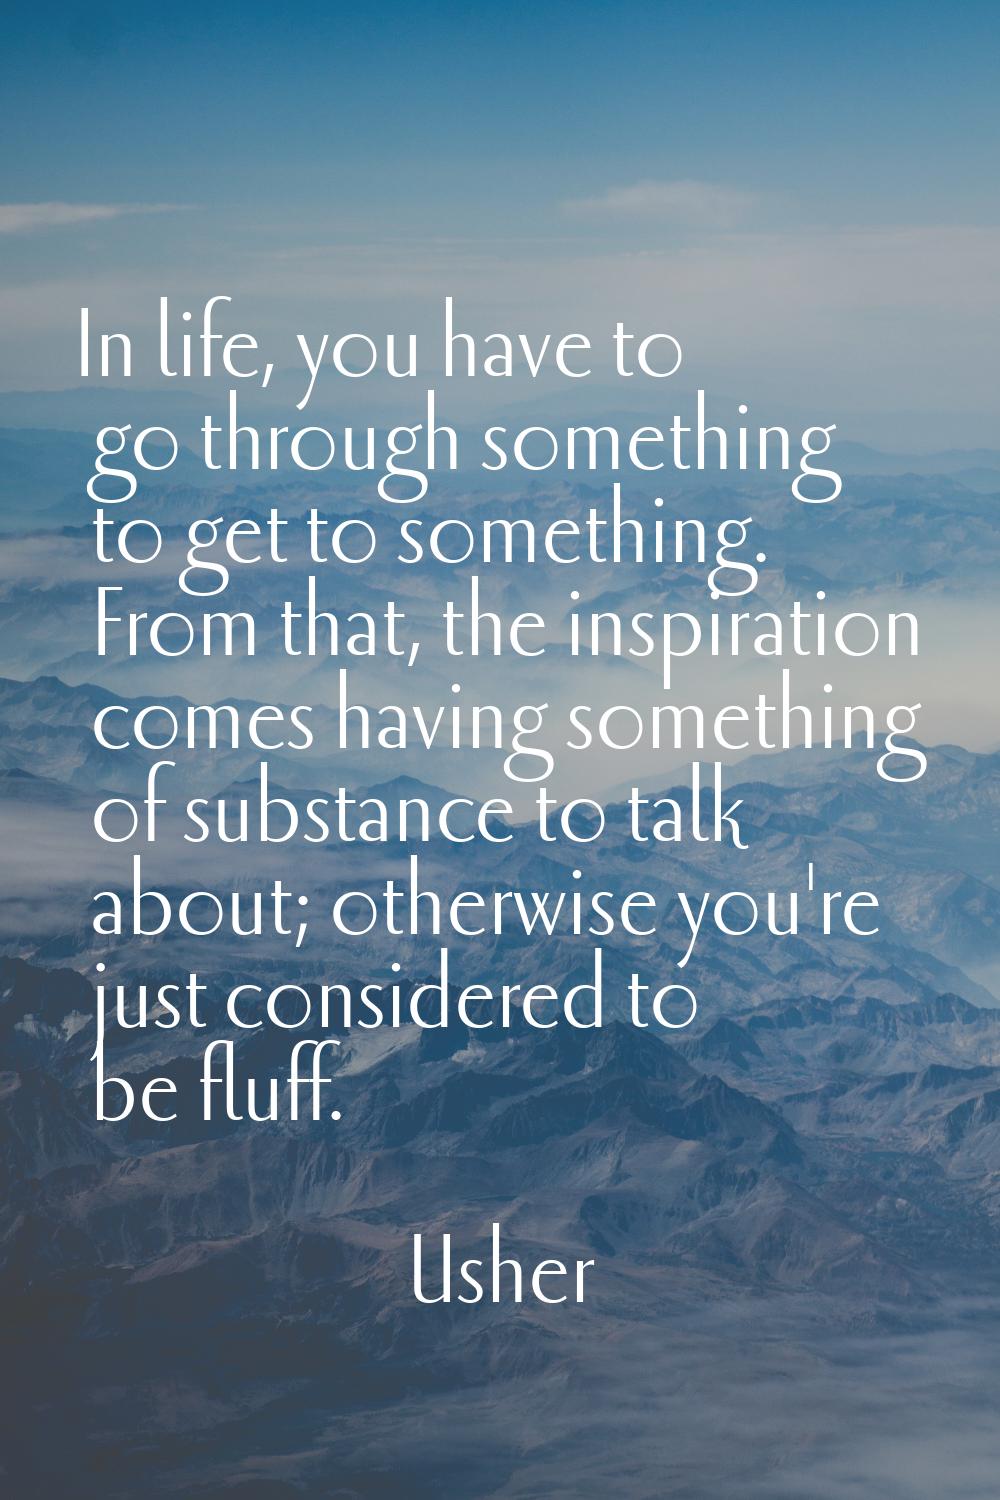 In life, you have to go through something to get to something. From that, the inspiration comes hav